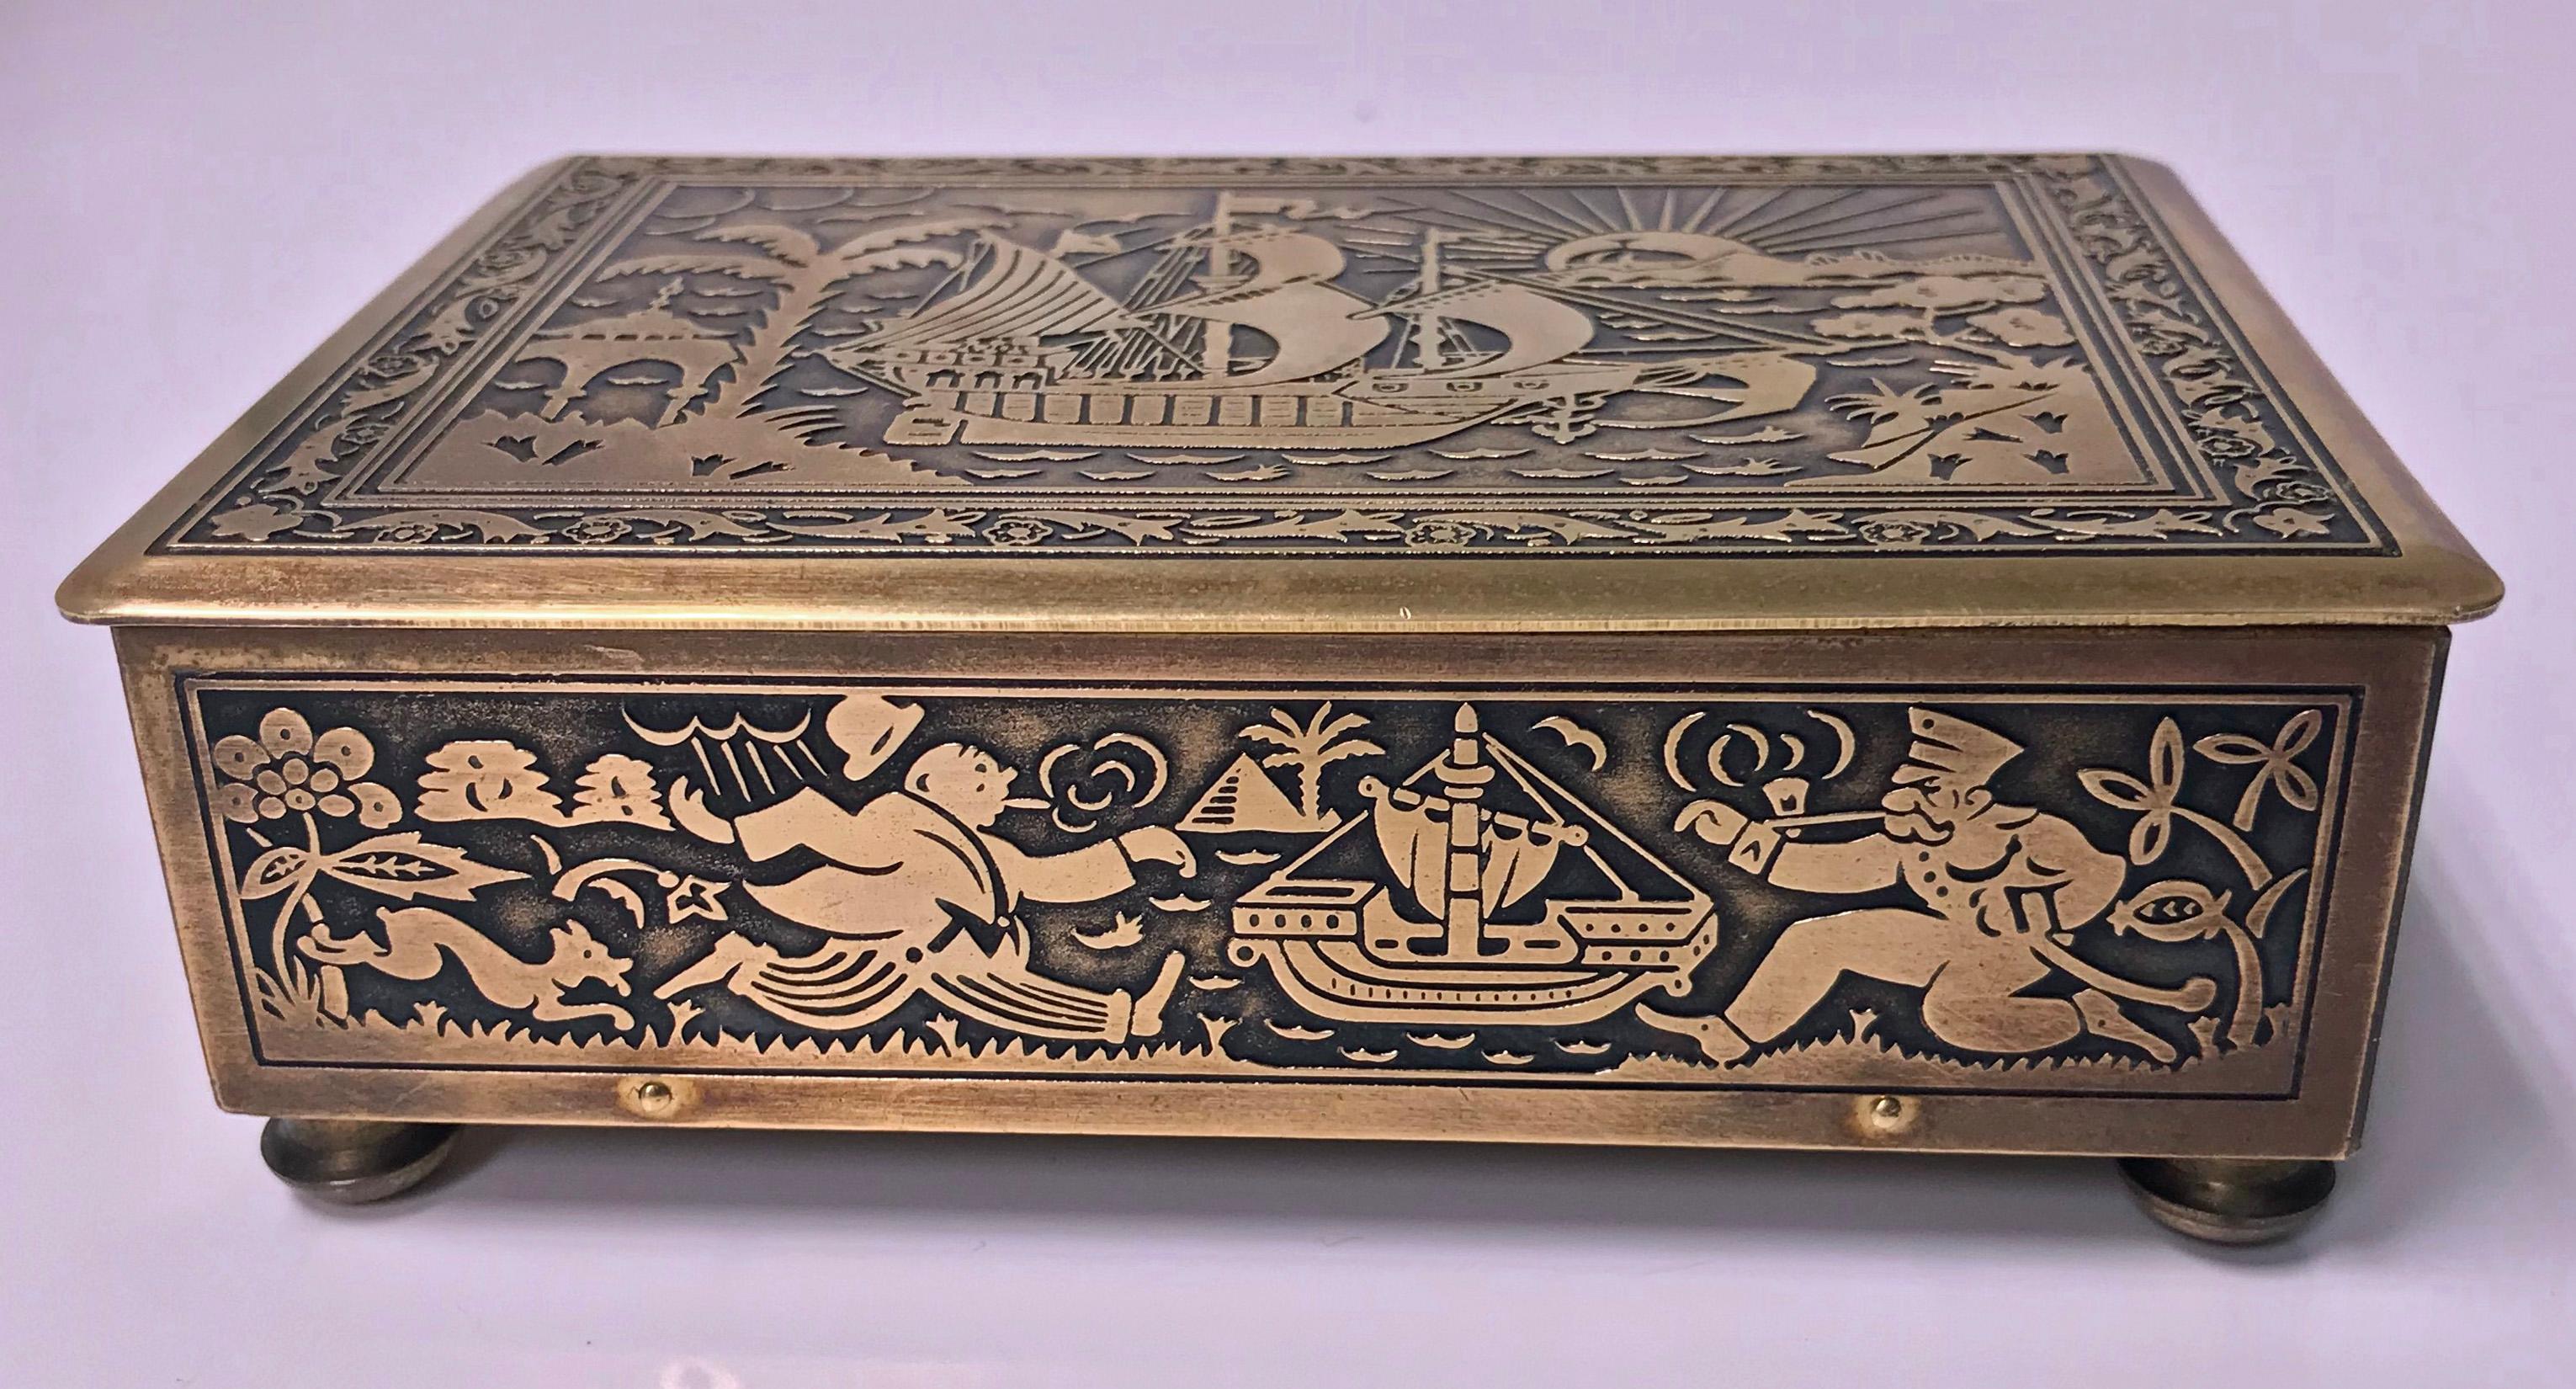 Art Deco Brass Jewellery Box, Germany C.1920 possibly by Erhard & Söhne of Schwäbisch Gmünd. The box of rectangular shape on brass bun feet, the brass body and cover oxidised inlay decorated with various scenes of running figures, animals, sunset